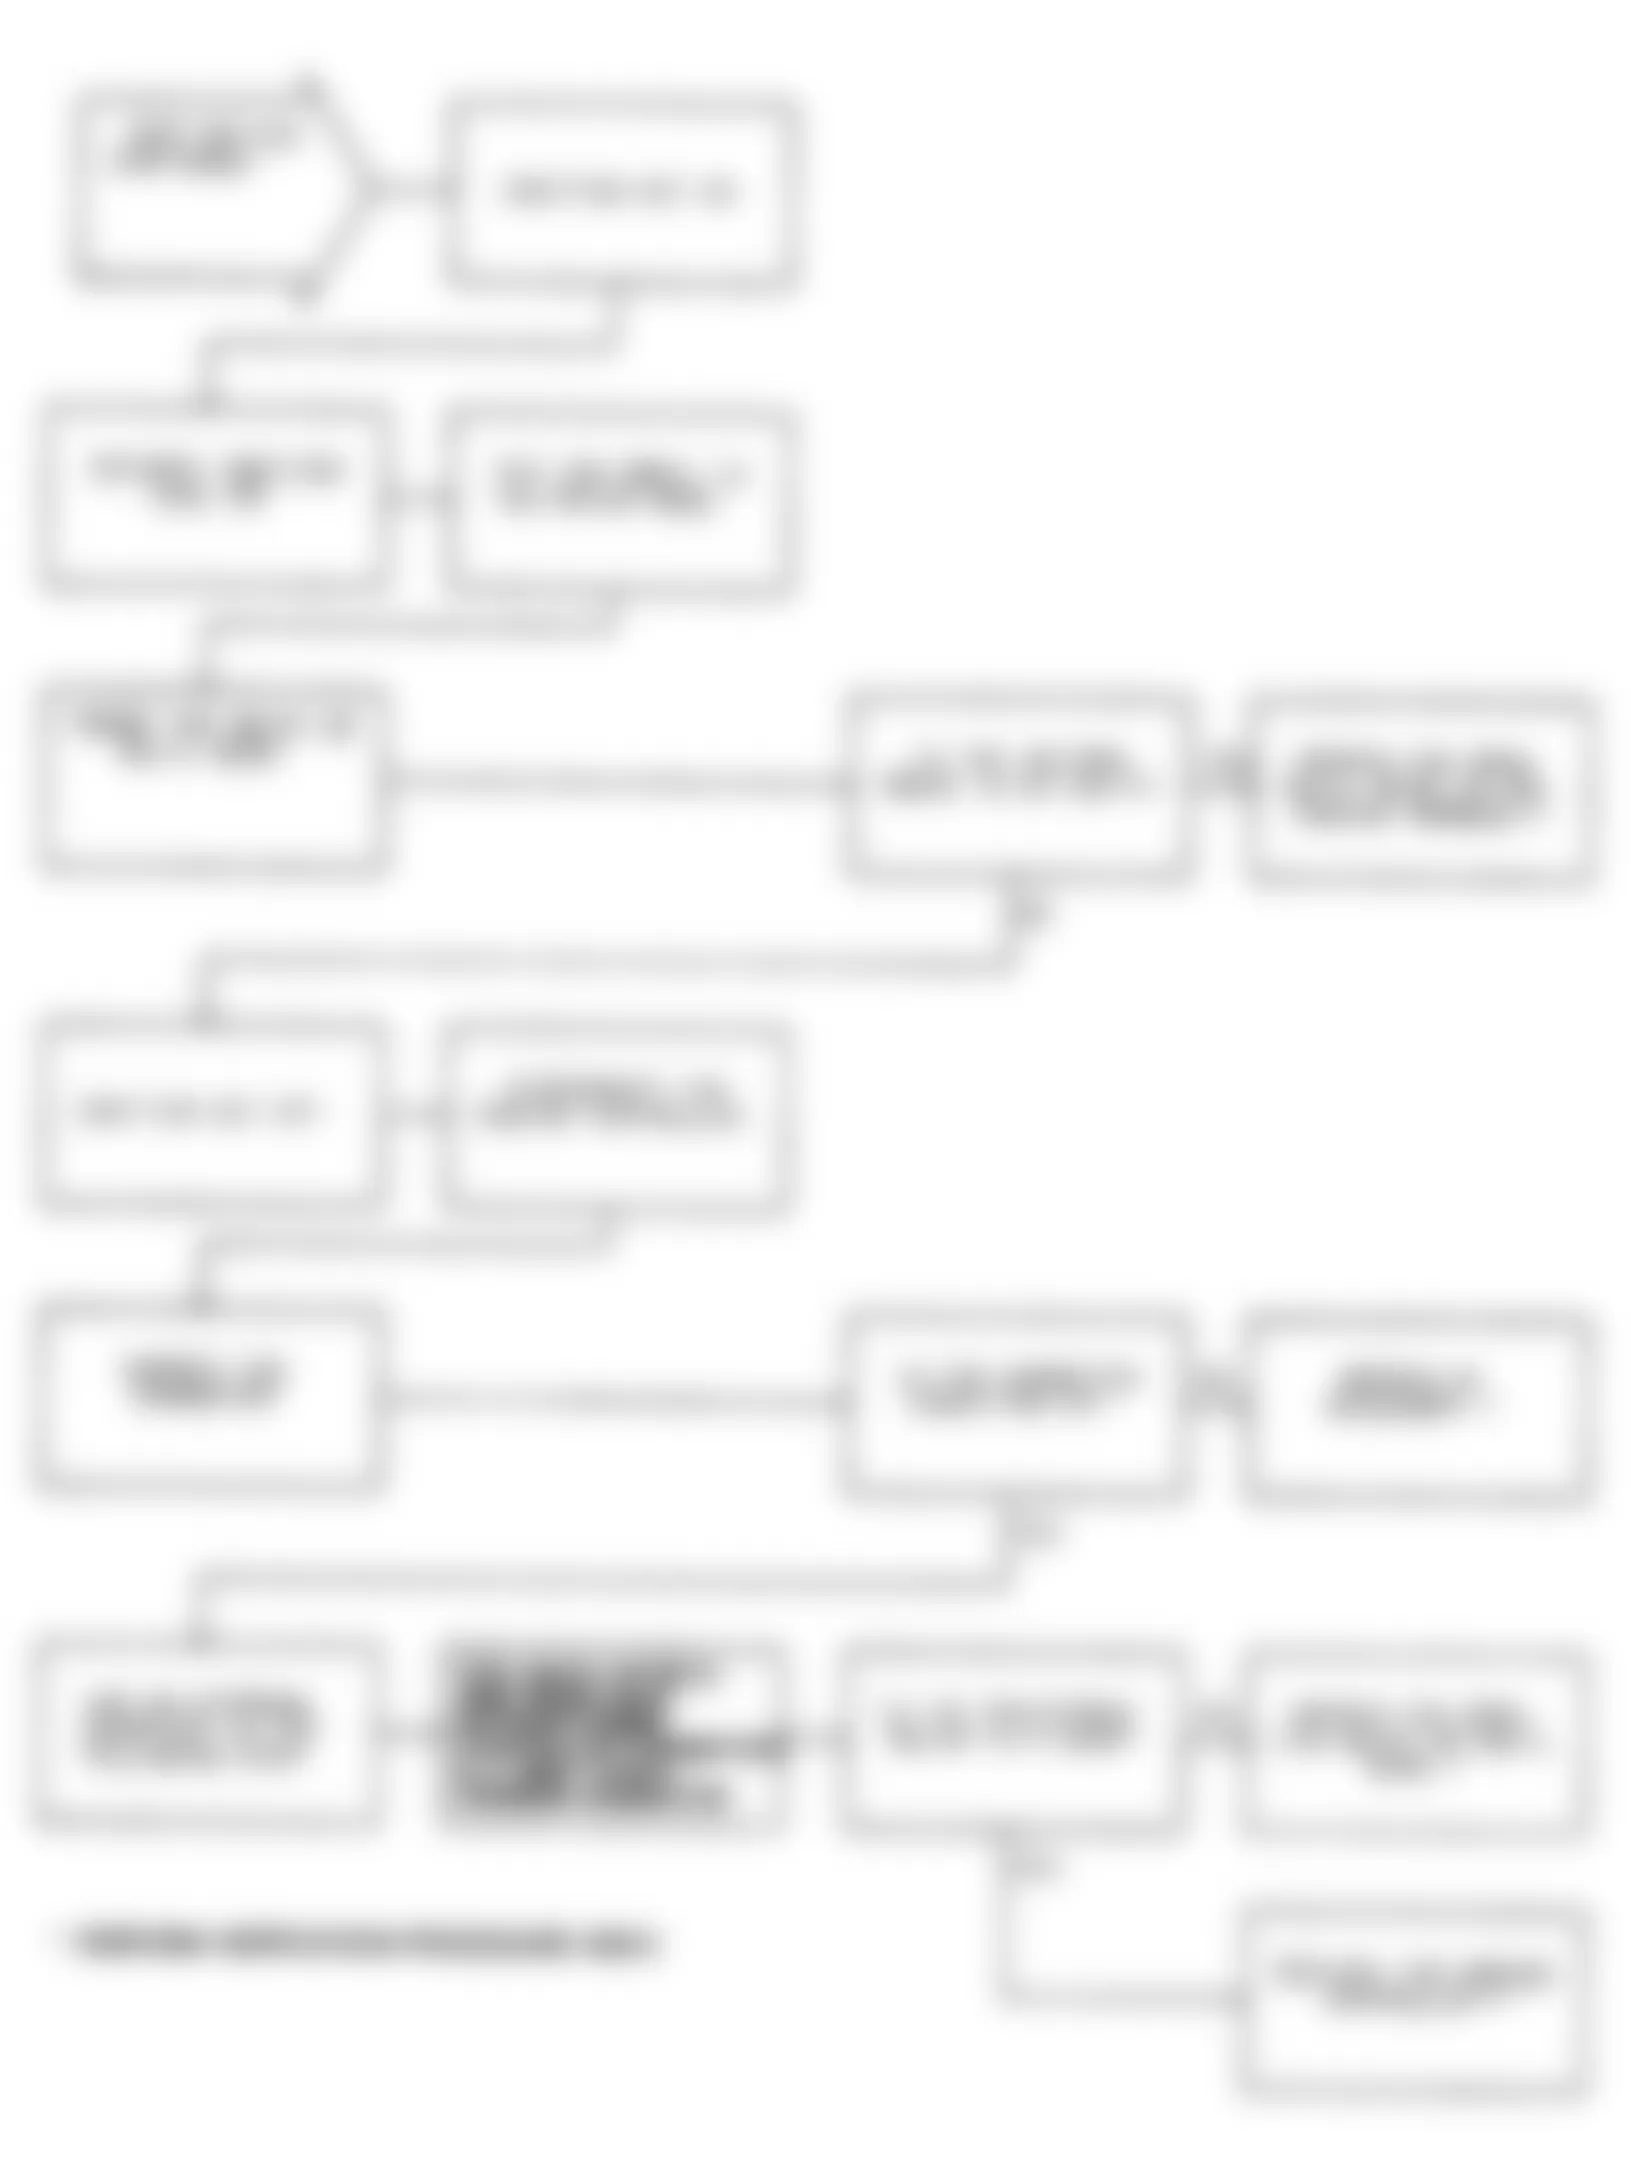 Chrysler Imperial 1991 - Component Locations -  Test DR-31A Code 43: Flowchart (2 of 2)